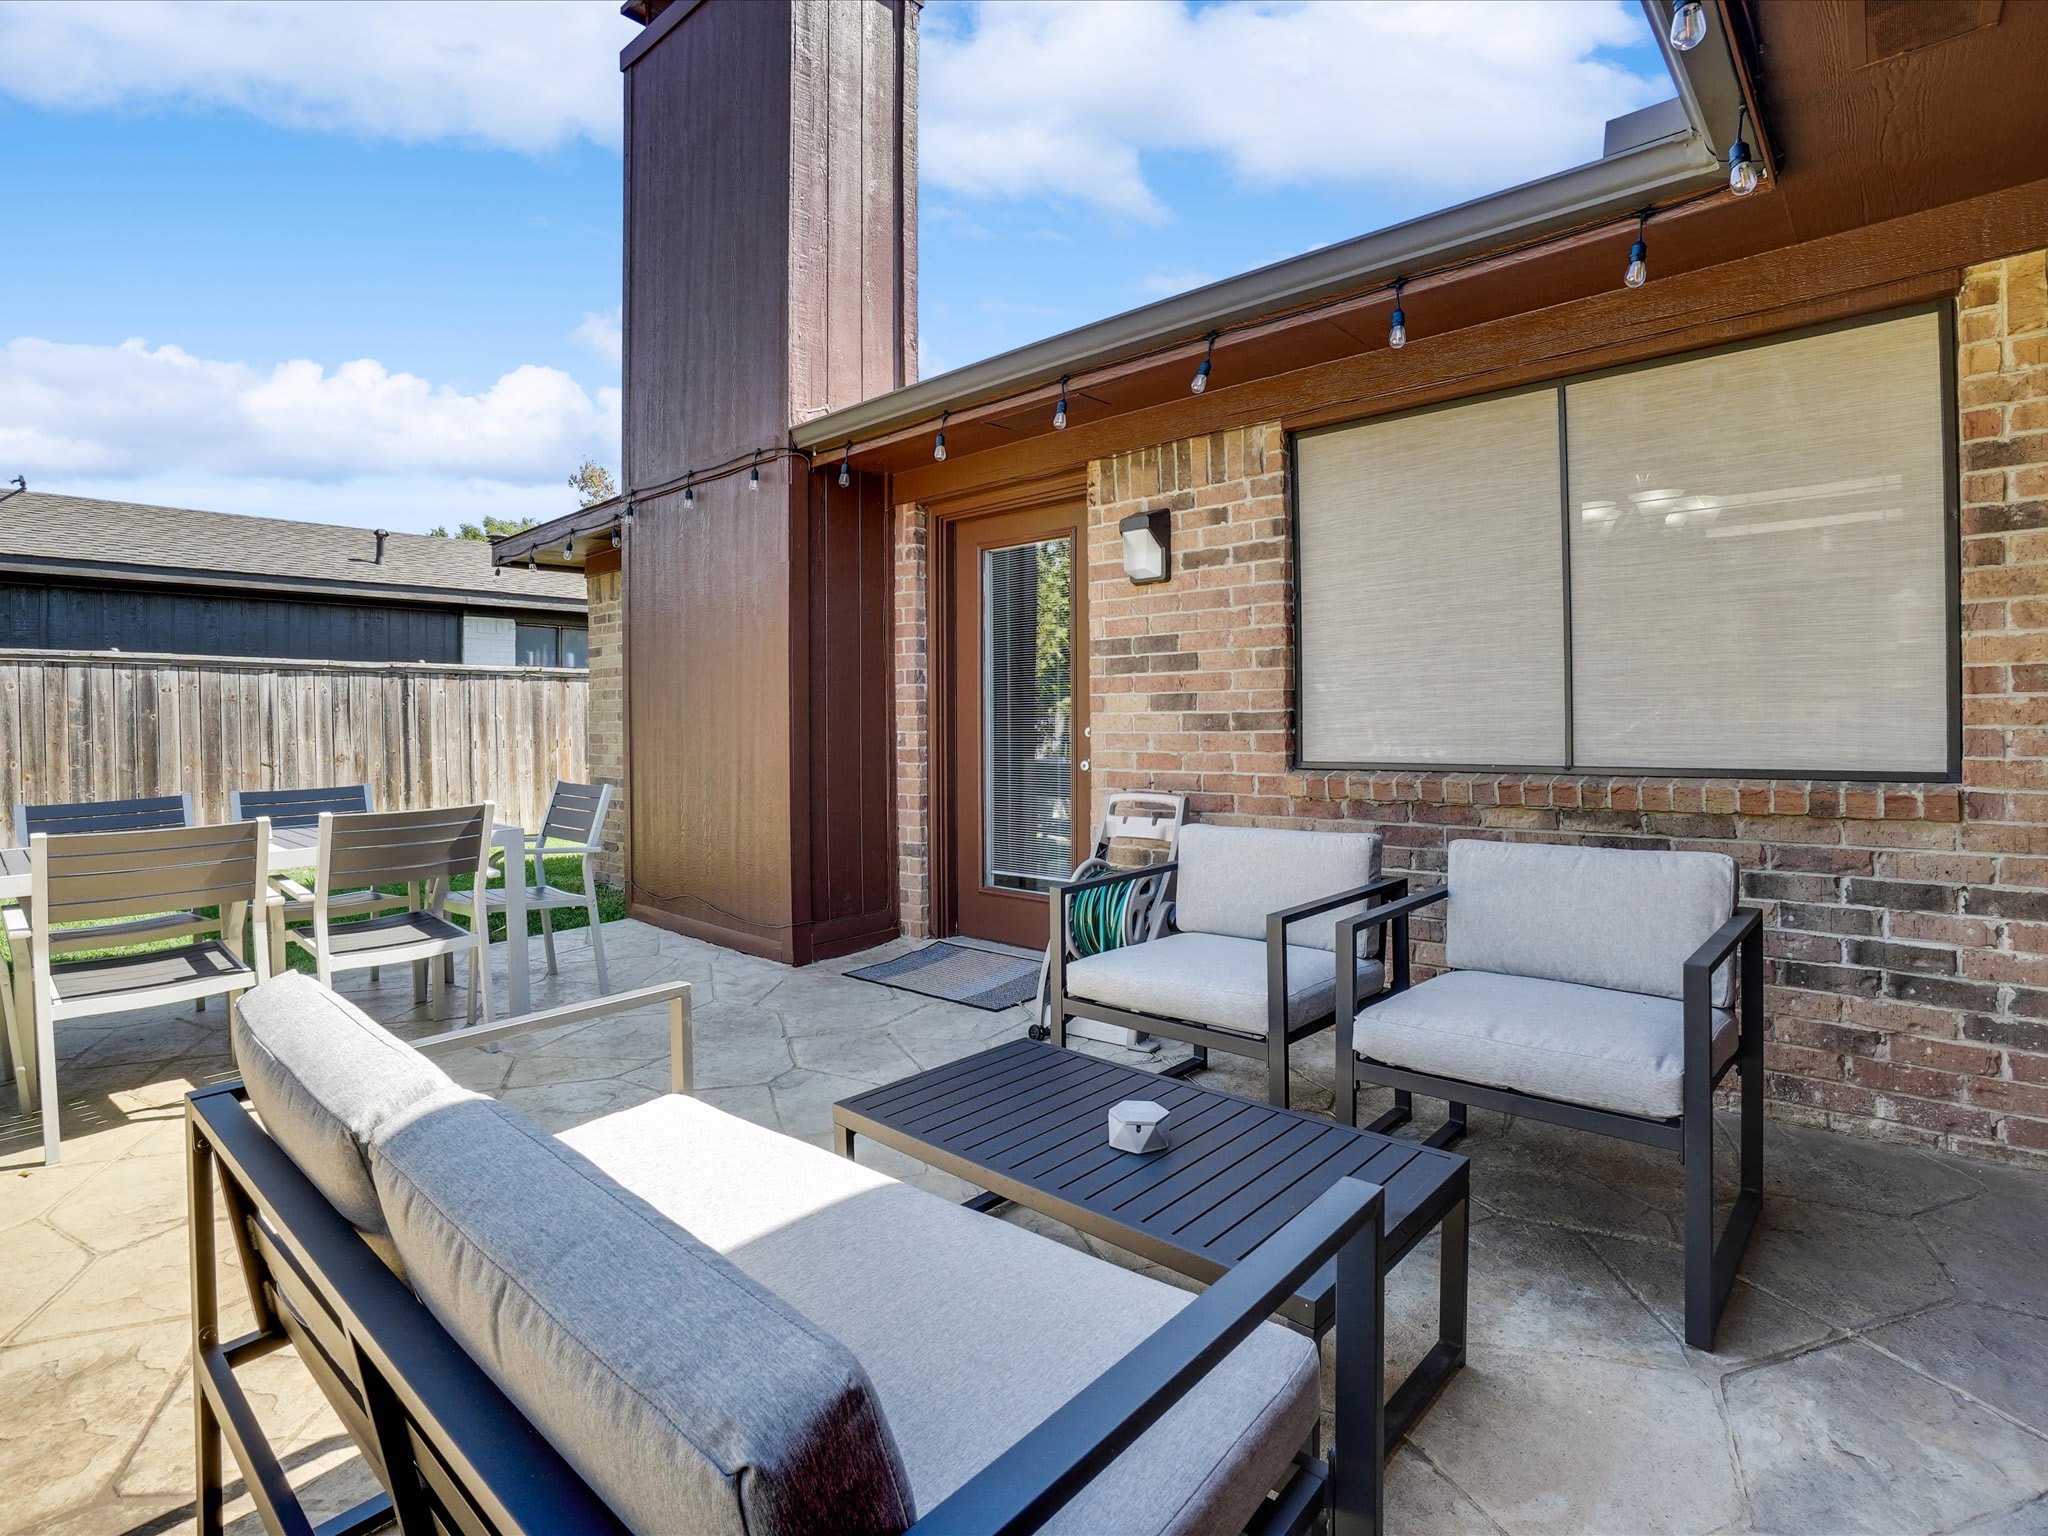 Come enjoy your morning coffee, your afternoon happy hour, or your evening aperitive on this private backyard patio! 